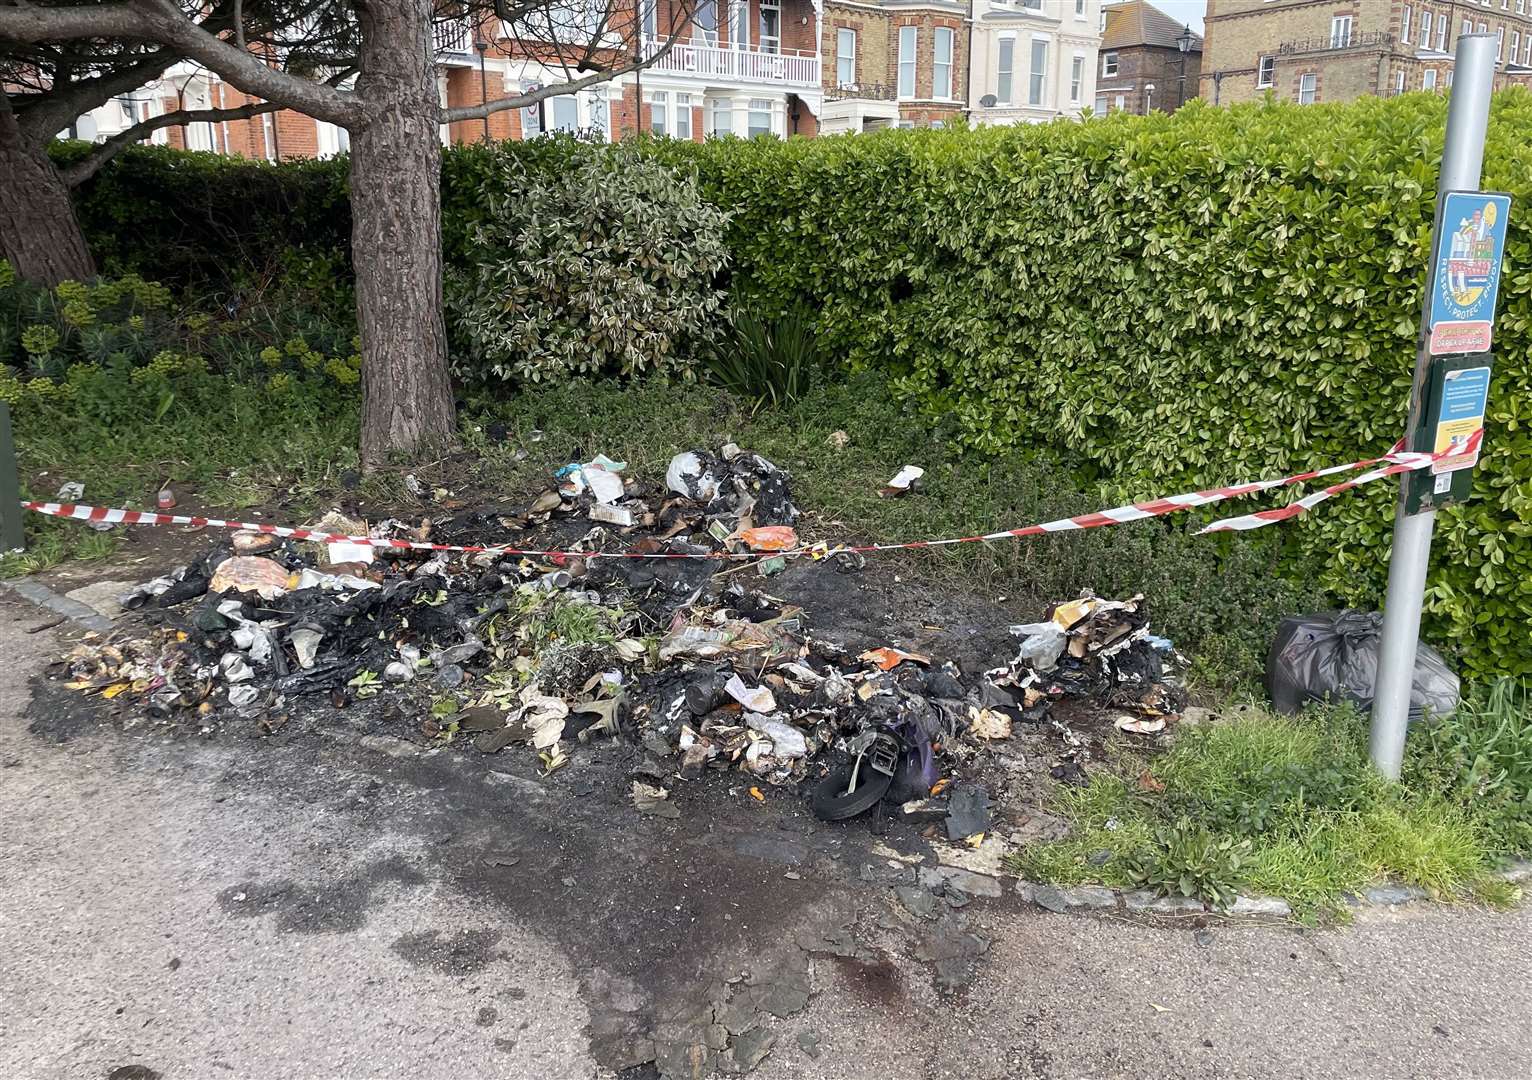 The bins were destroyed on Monday from a firework. Picture: Mike Bridges